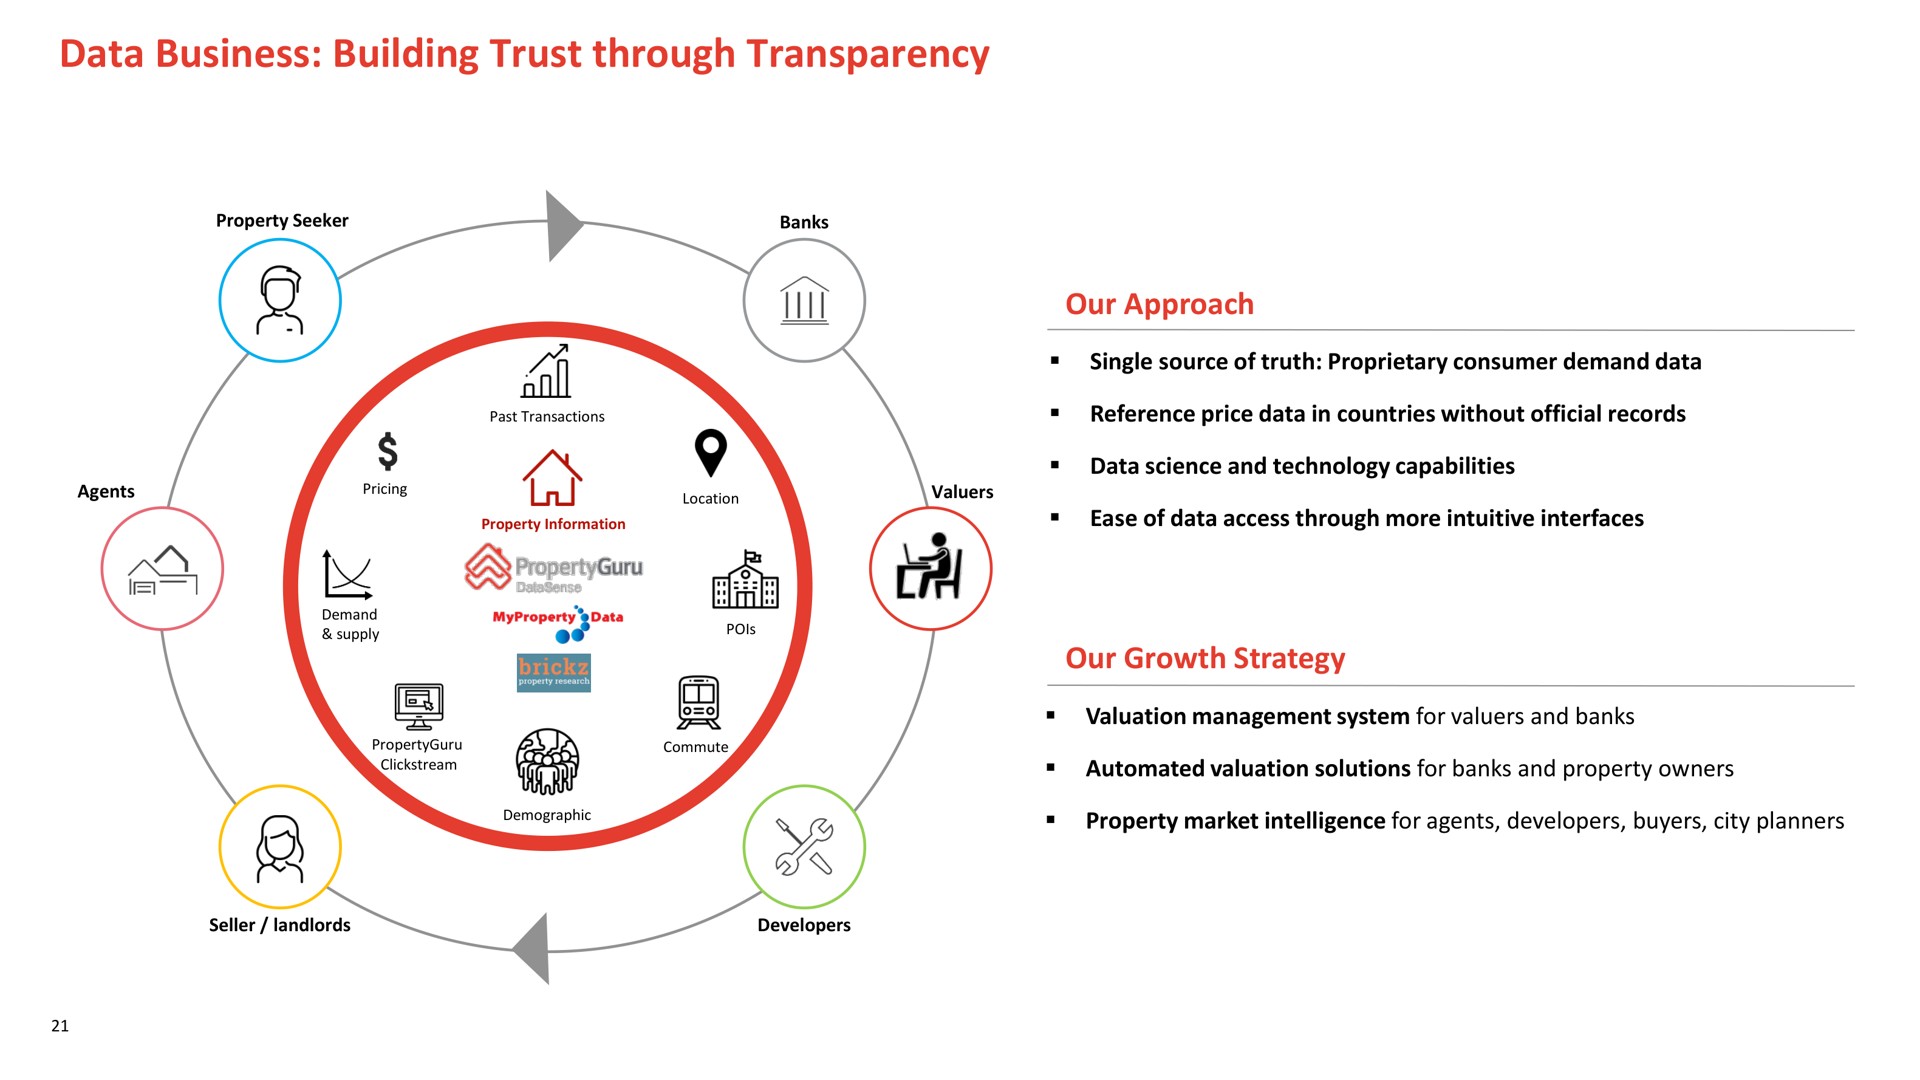 data business building trust through transparency our approach our growth strategy | PropertyGuru